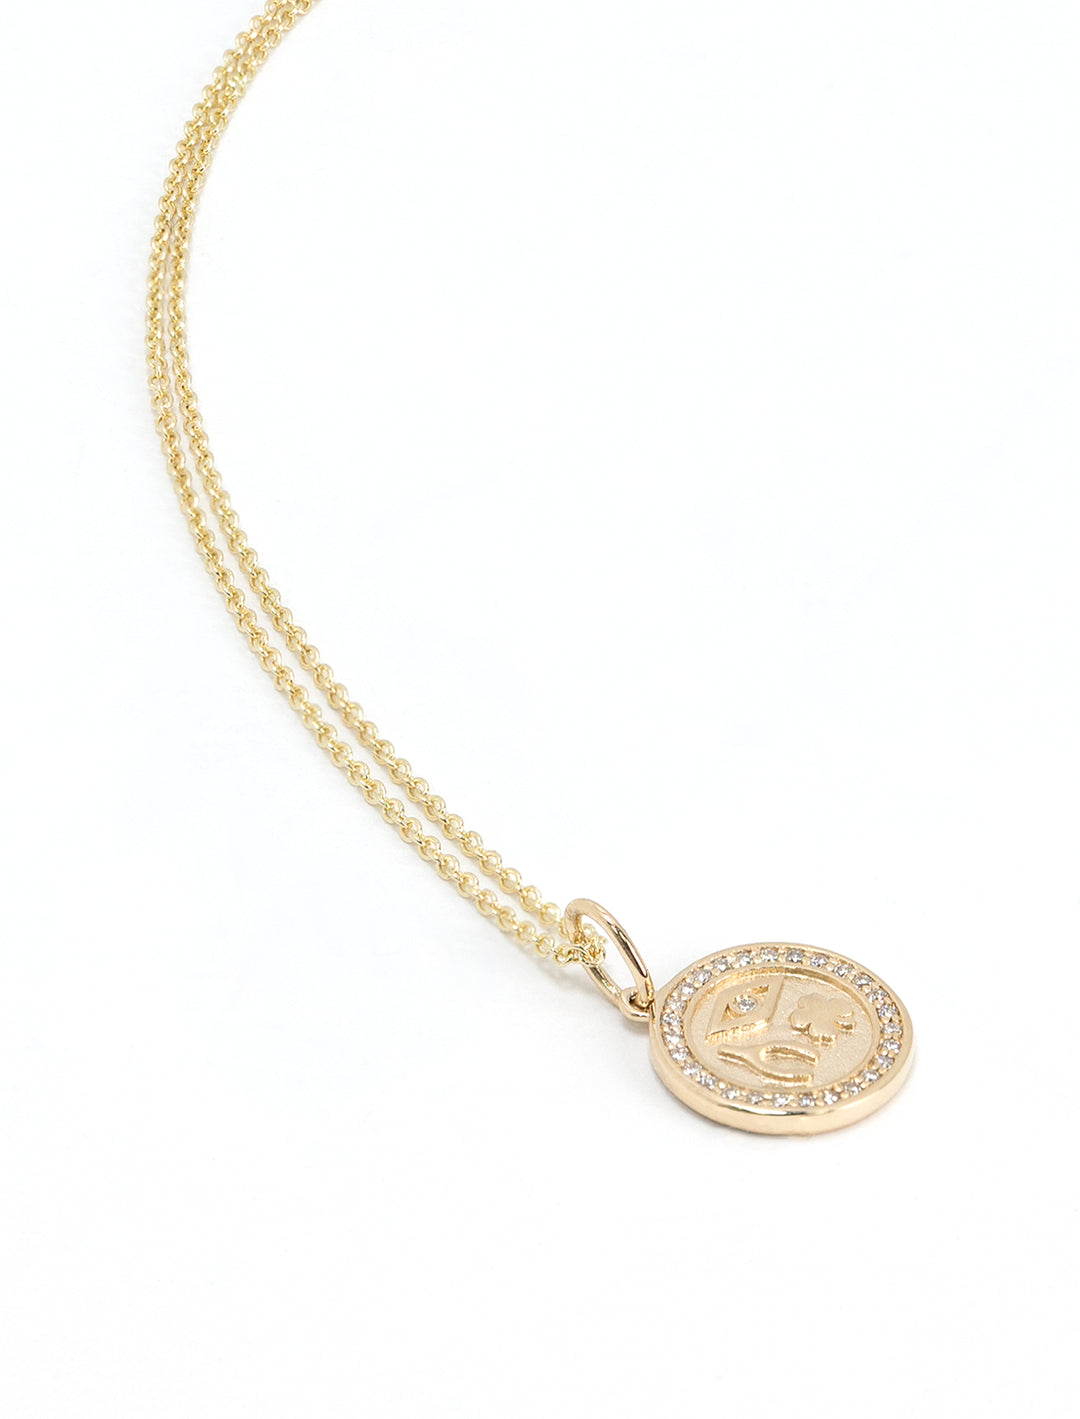 Stylized laydown of Sydney Evan's Luck and Protection Pave Border Medallion Necklace.